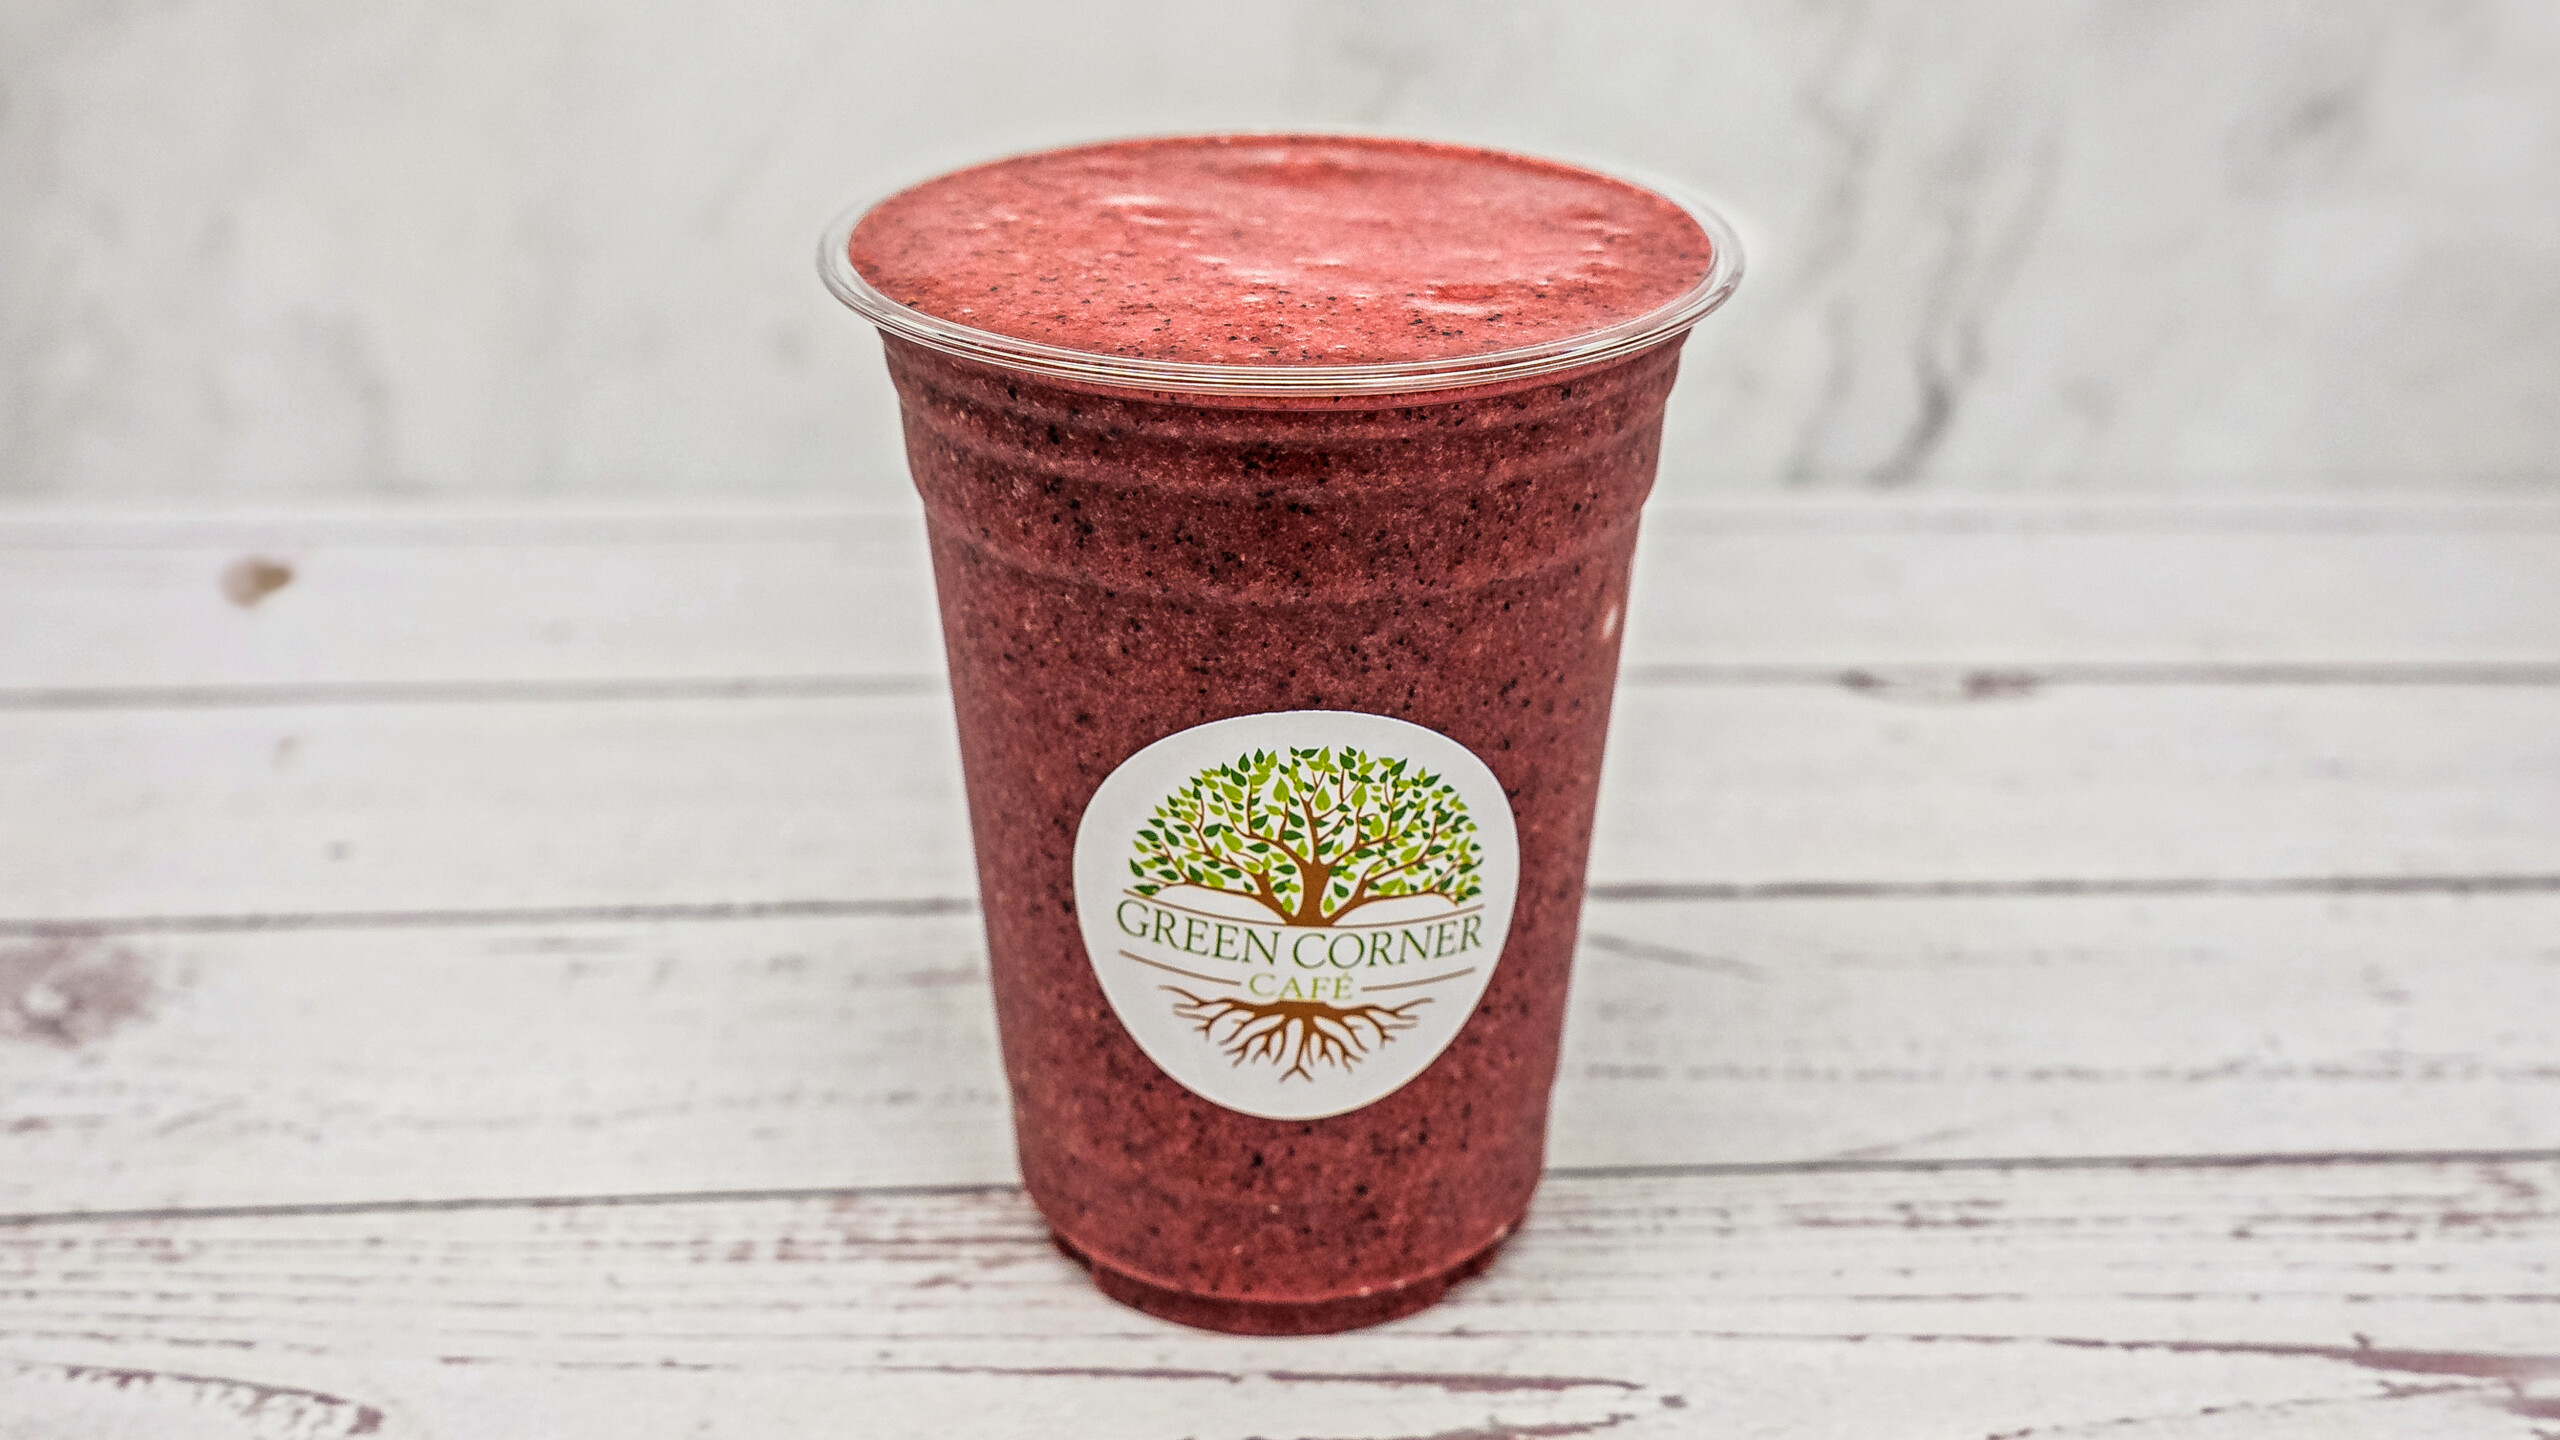 Berry Bliss Smoothie - Best Smoothies in Scotch Plains NJ